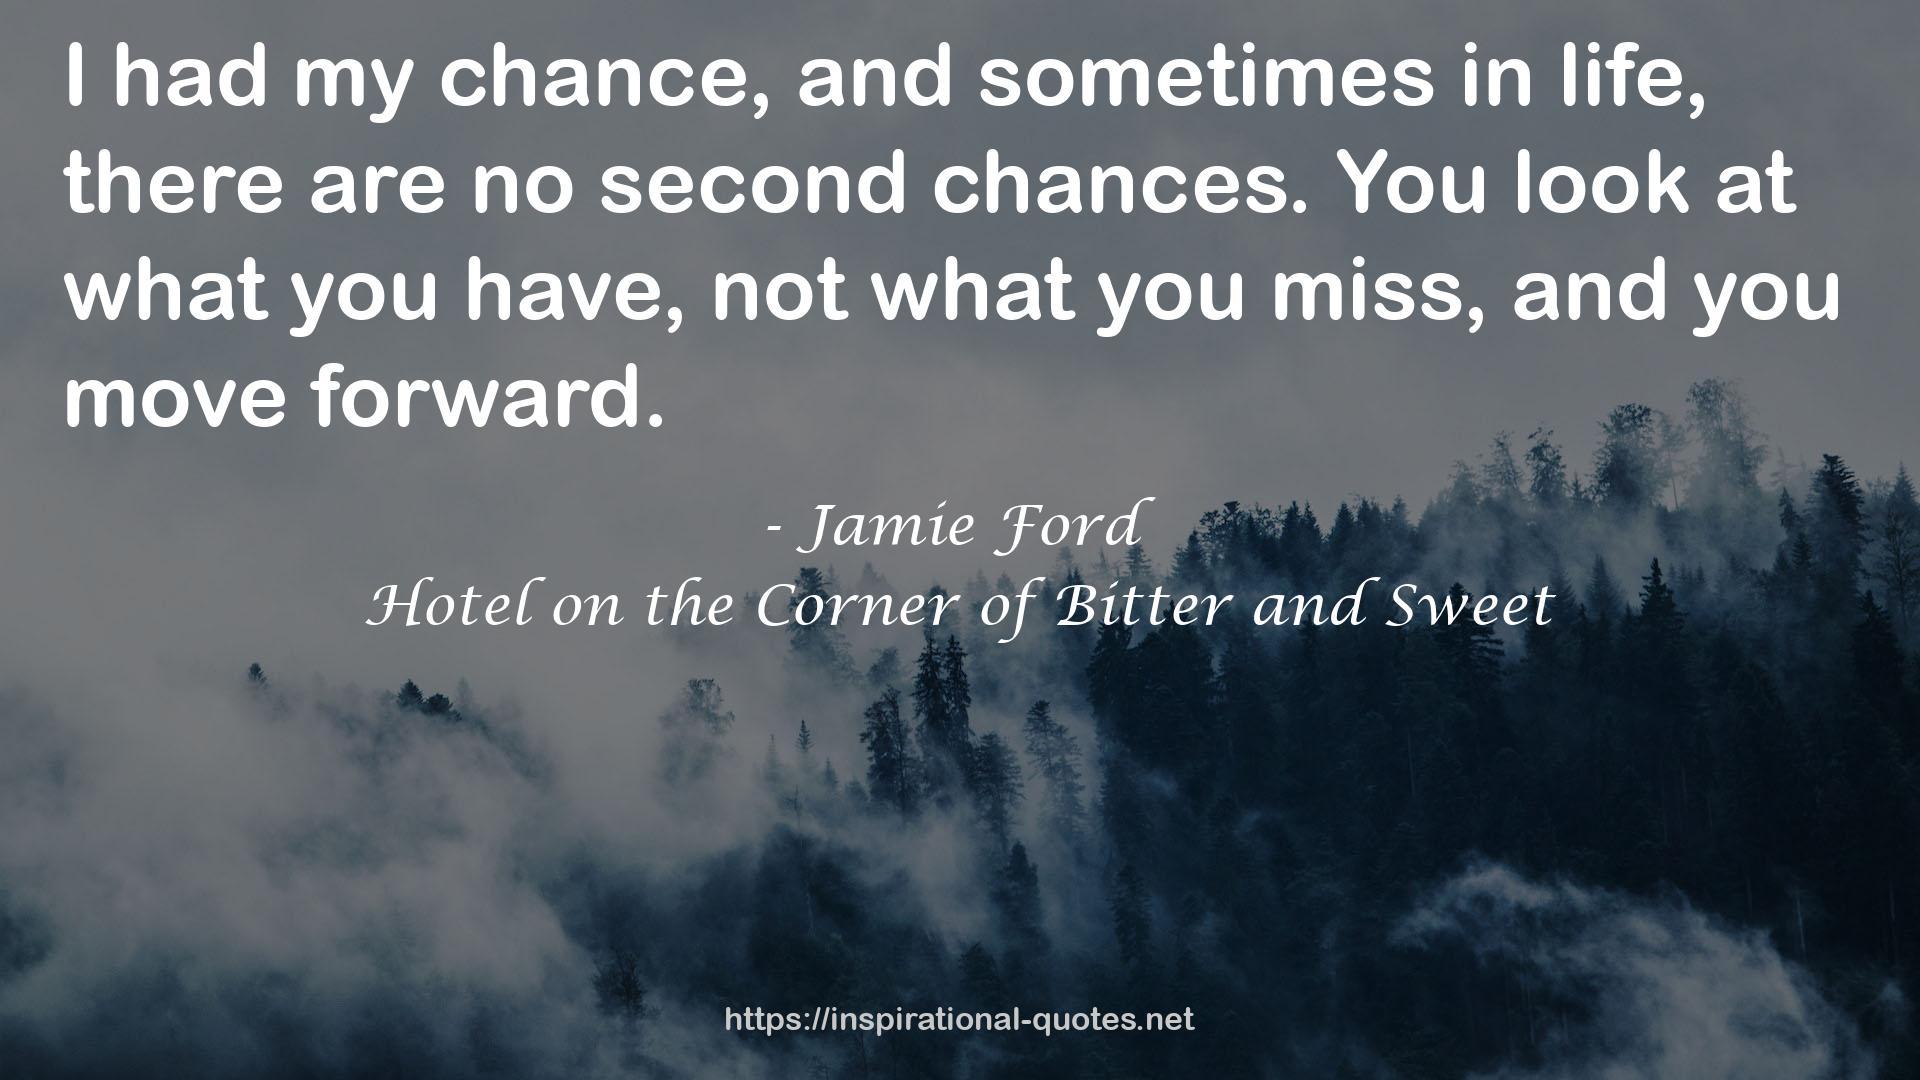 Jamie Ford QUOTES